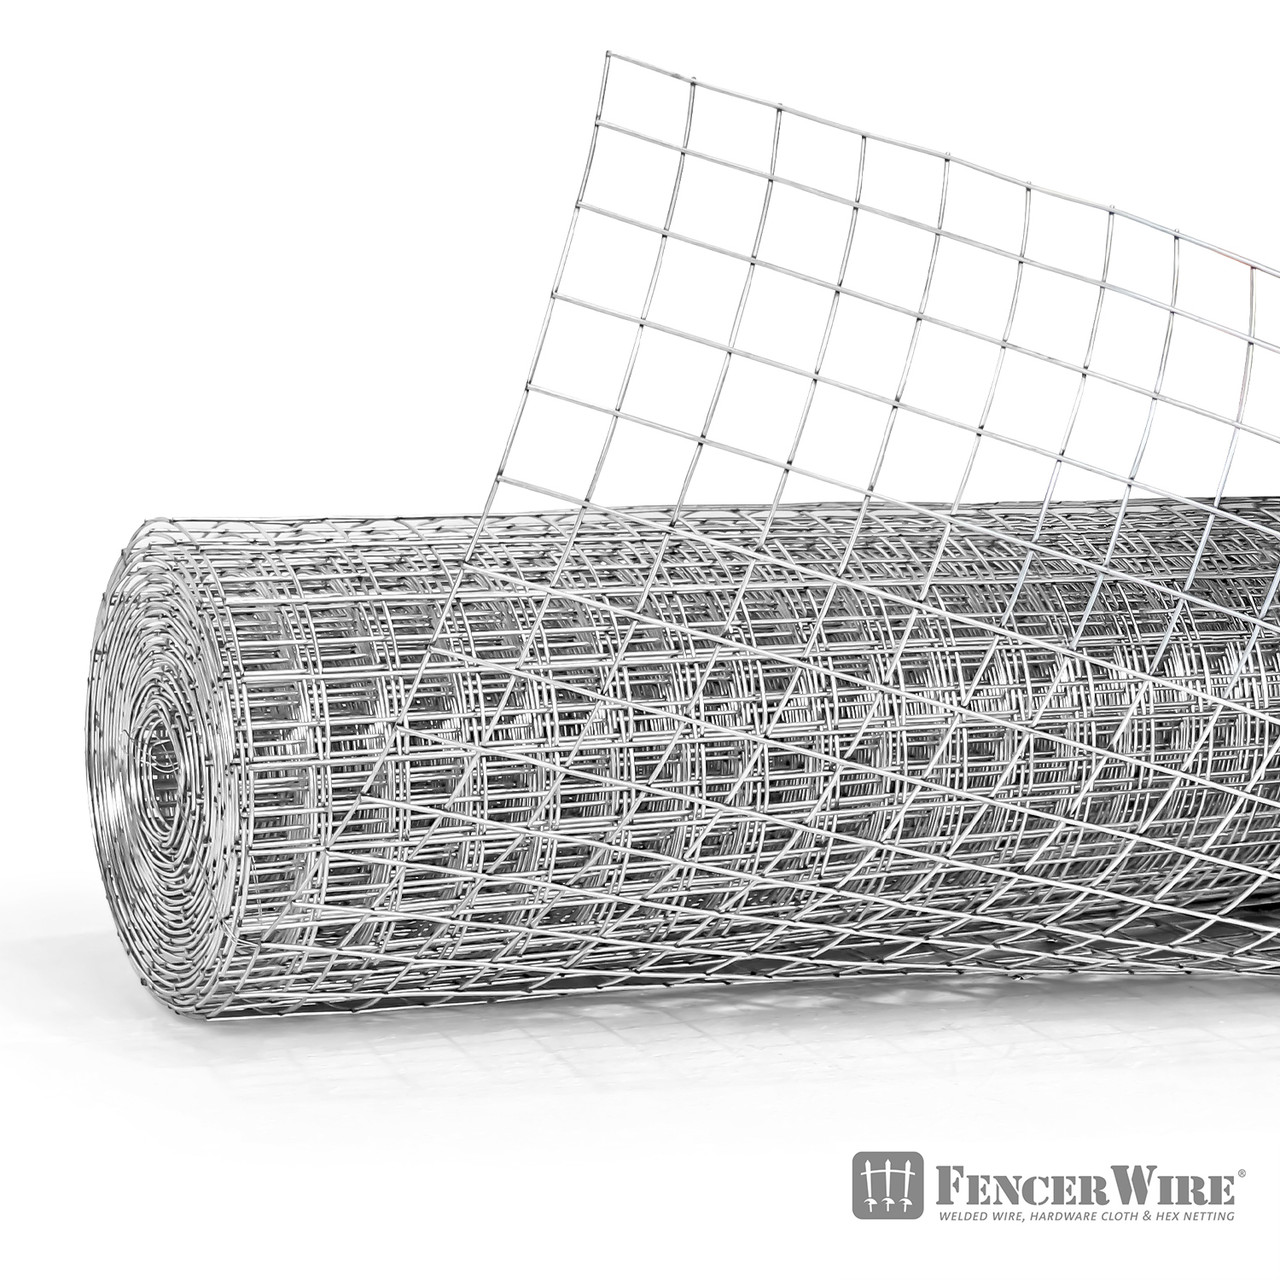 Fencer Wire Heavy Duty 10 Gauge Galvanized Welded Wire Fence, 2 x 2  Opening Mesh for Vegetables, Garden Fruits & Animals Enclosure (4 ft. x 50  ft.)